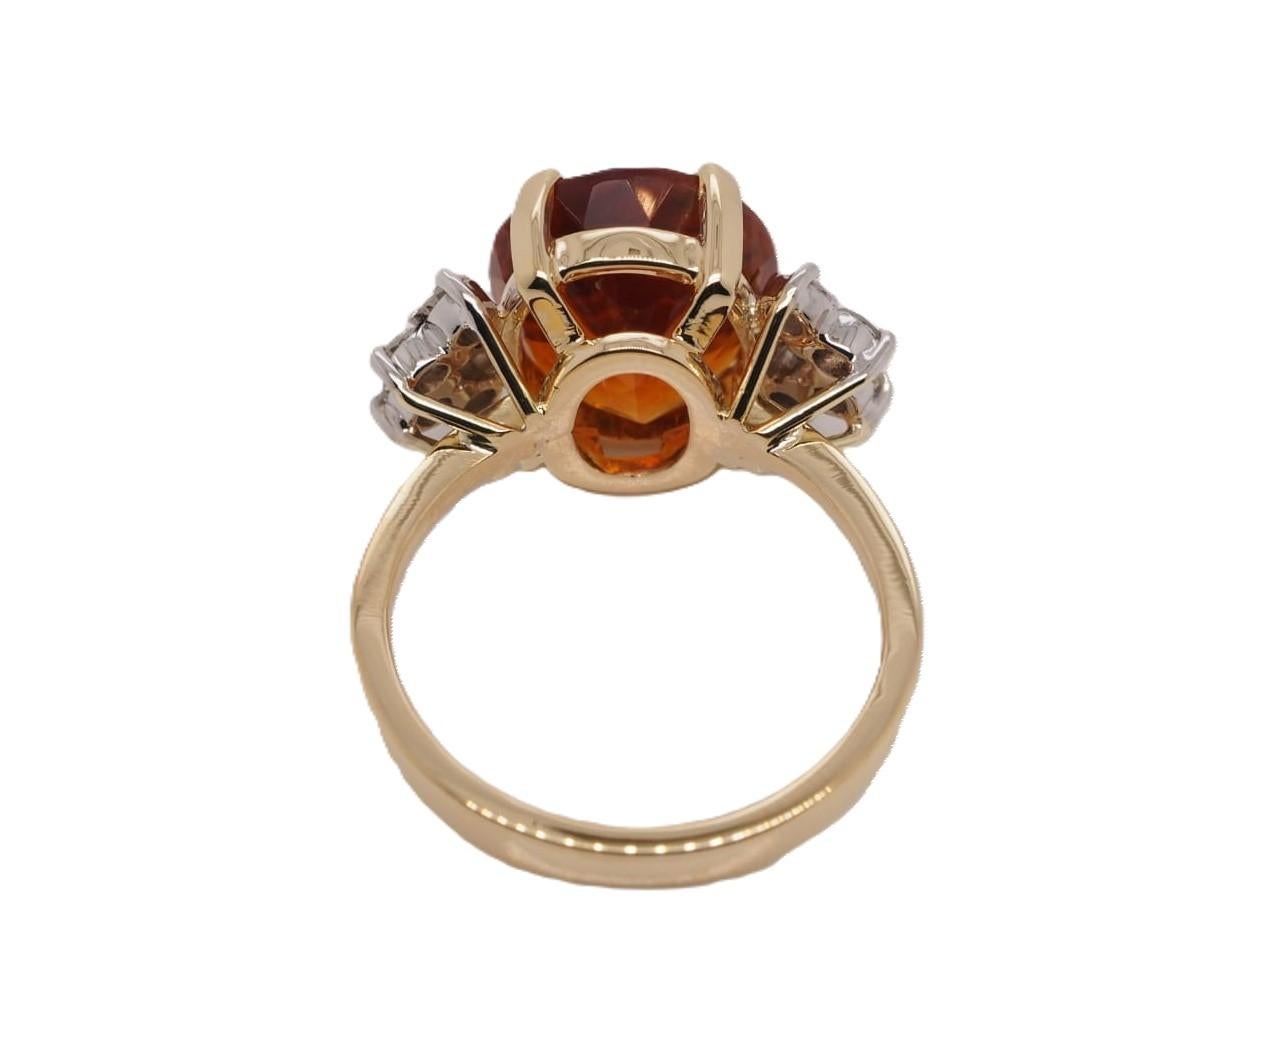 This stunning H. Stern ring features an oval citrine stone measuring 10.6 x 12.8 mm in a prong setting. The citrine is accented with 10 round diamonds totaling 0.35 carats. The band is made of 18k yellow gold and is 2 mm wide. The ring is size 7 and